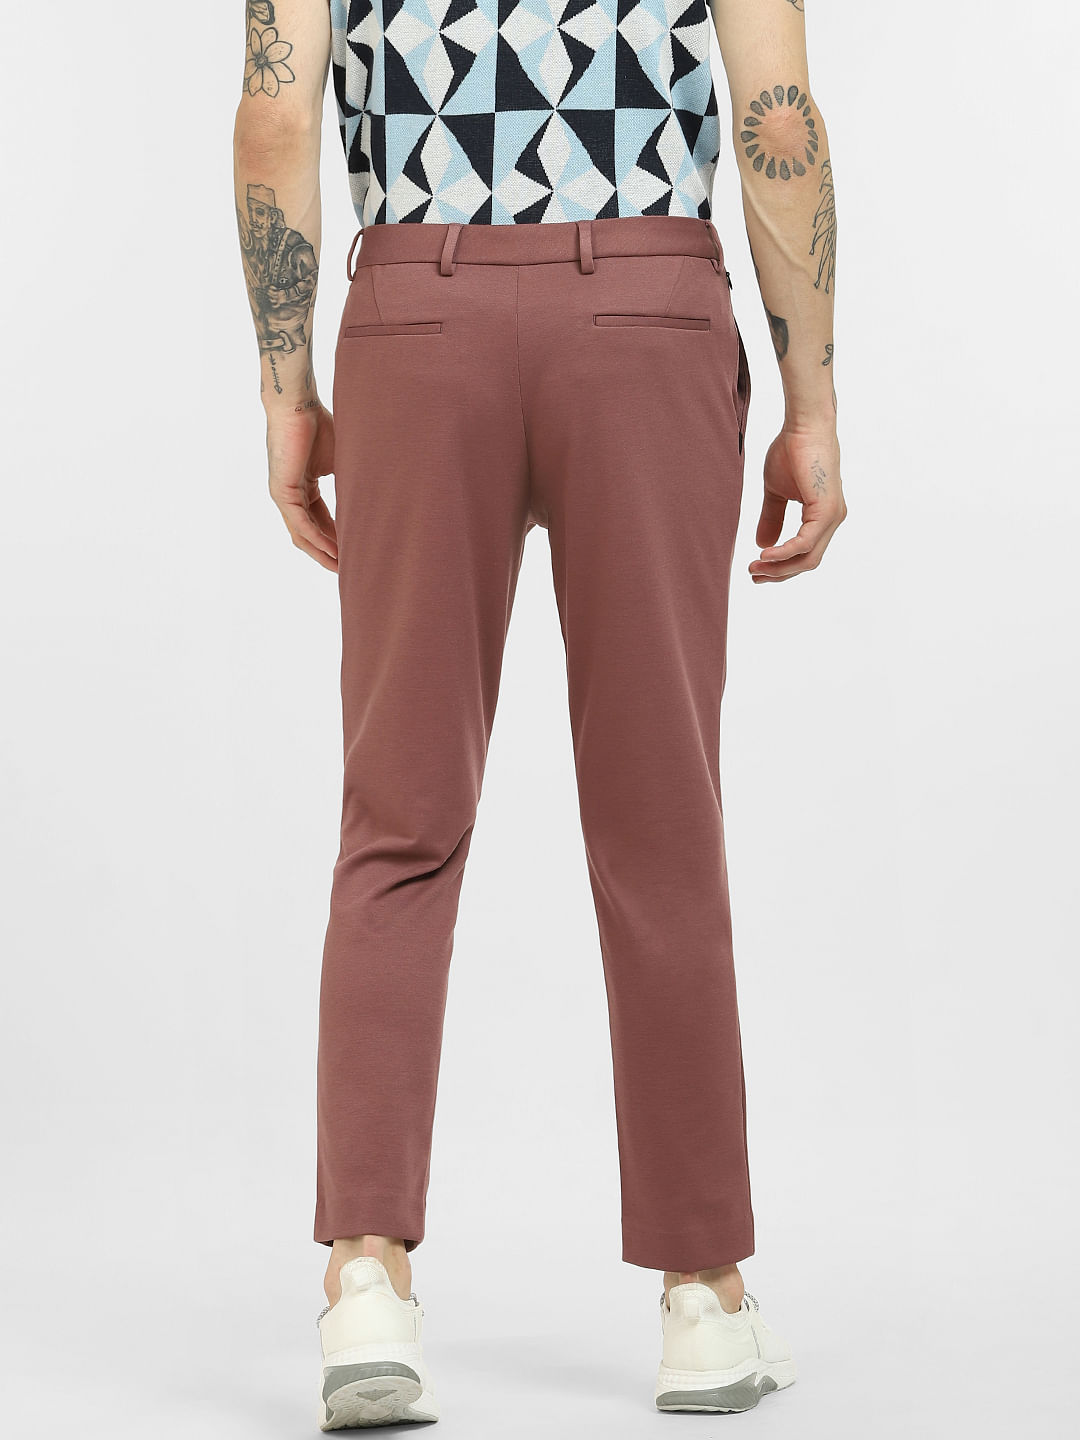 What to Wear with Brown Pants The Mens Style Guide  Berle